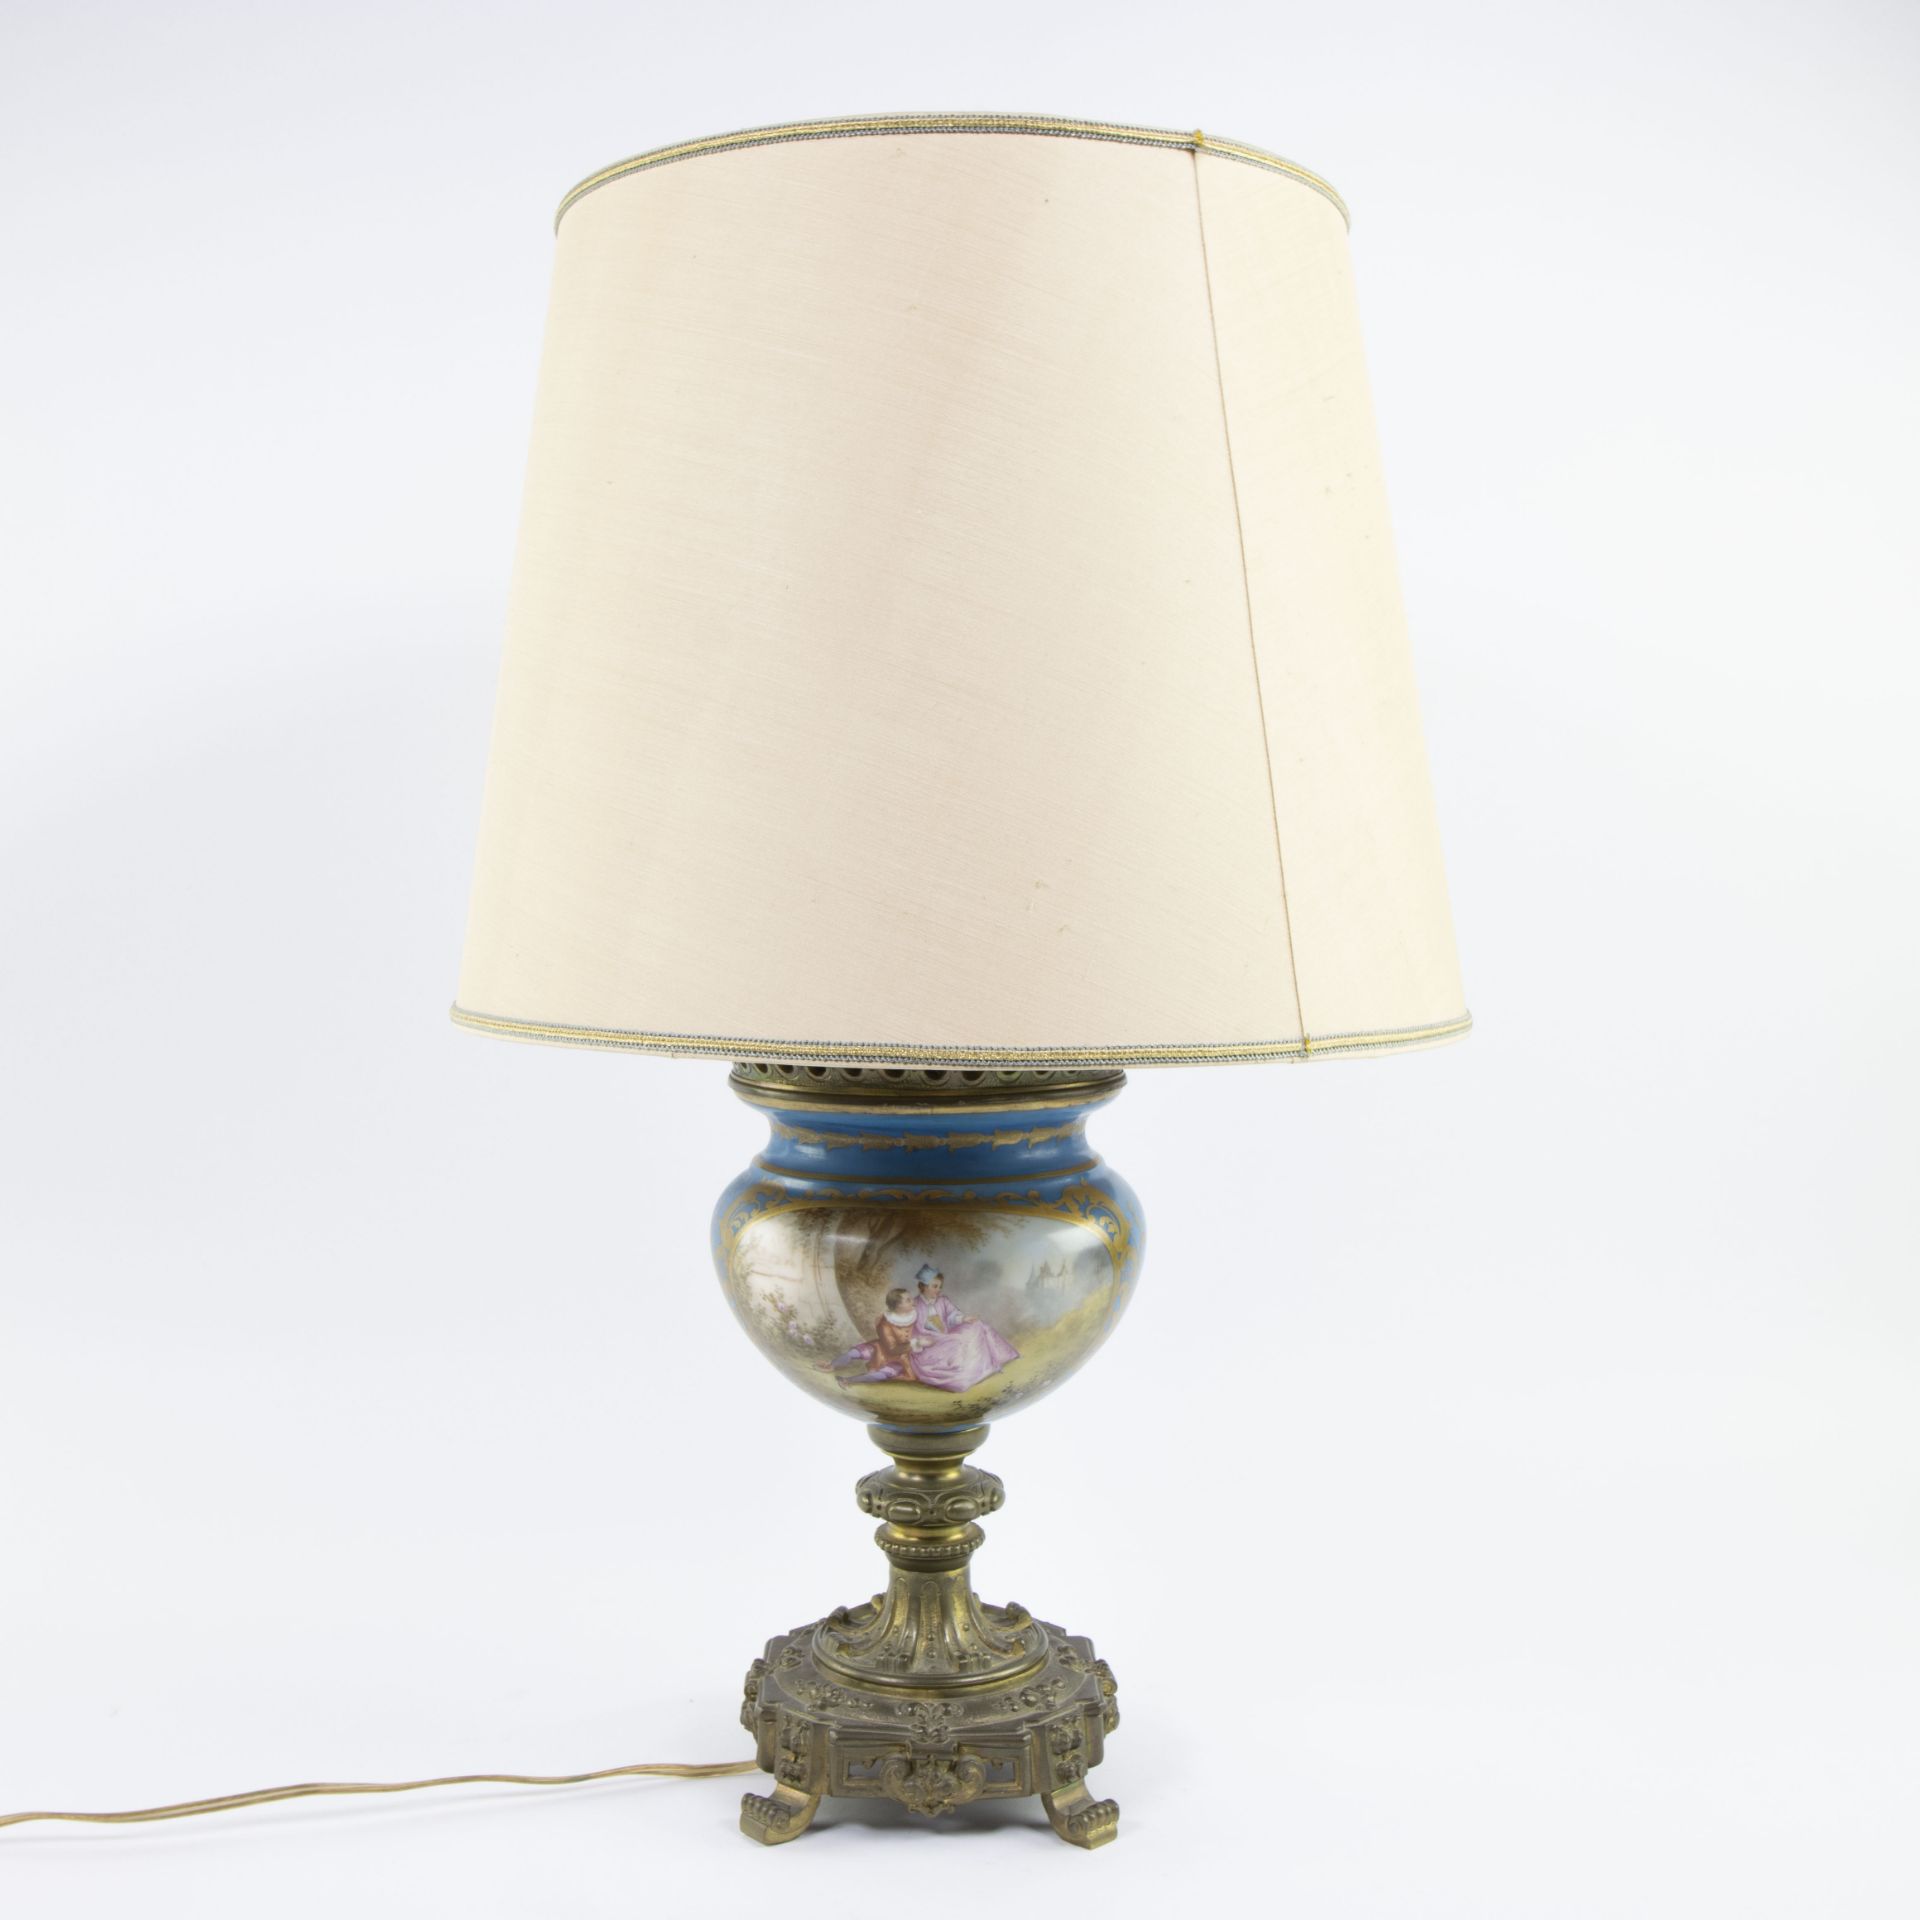 Vase of Sèvres porcelain with hand-painted decor with gilt bronze base. Mounted as lamp.